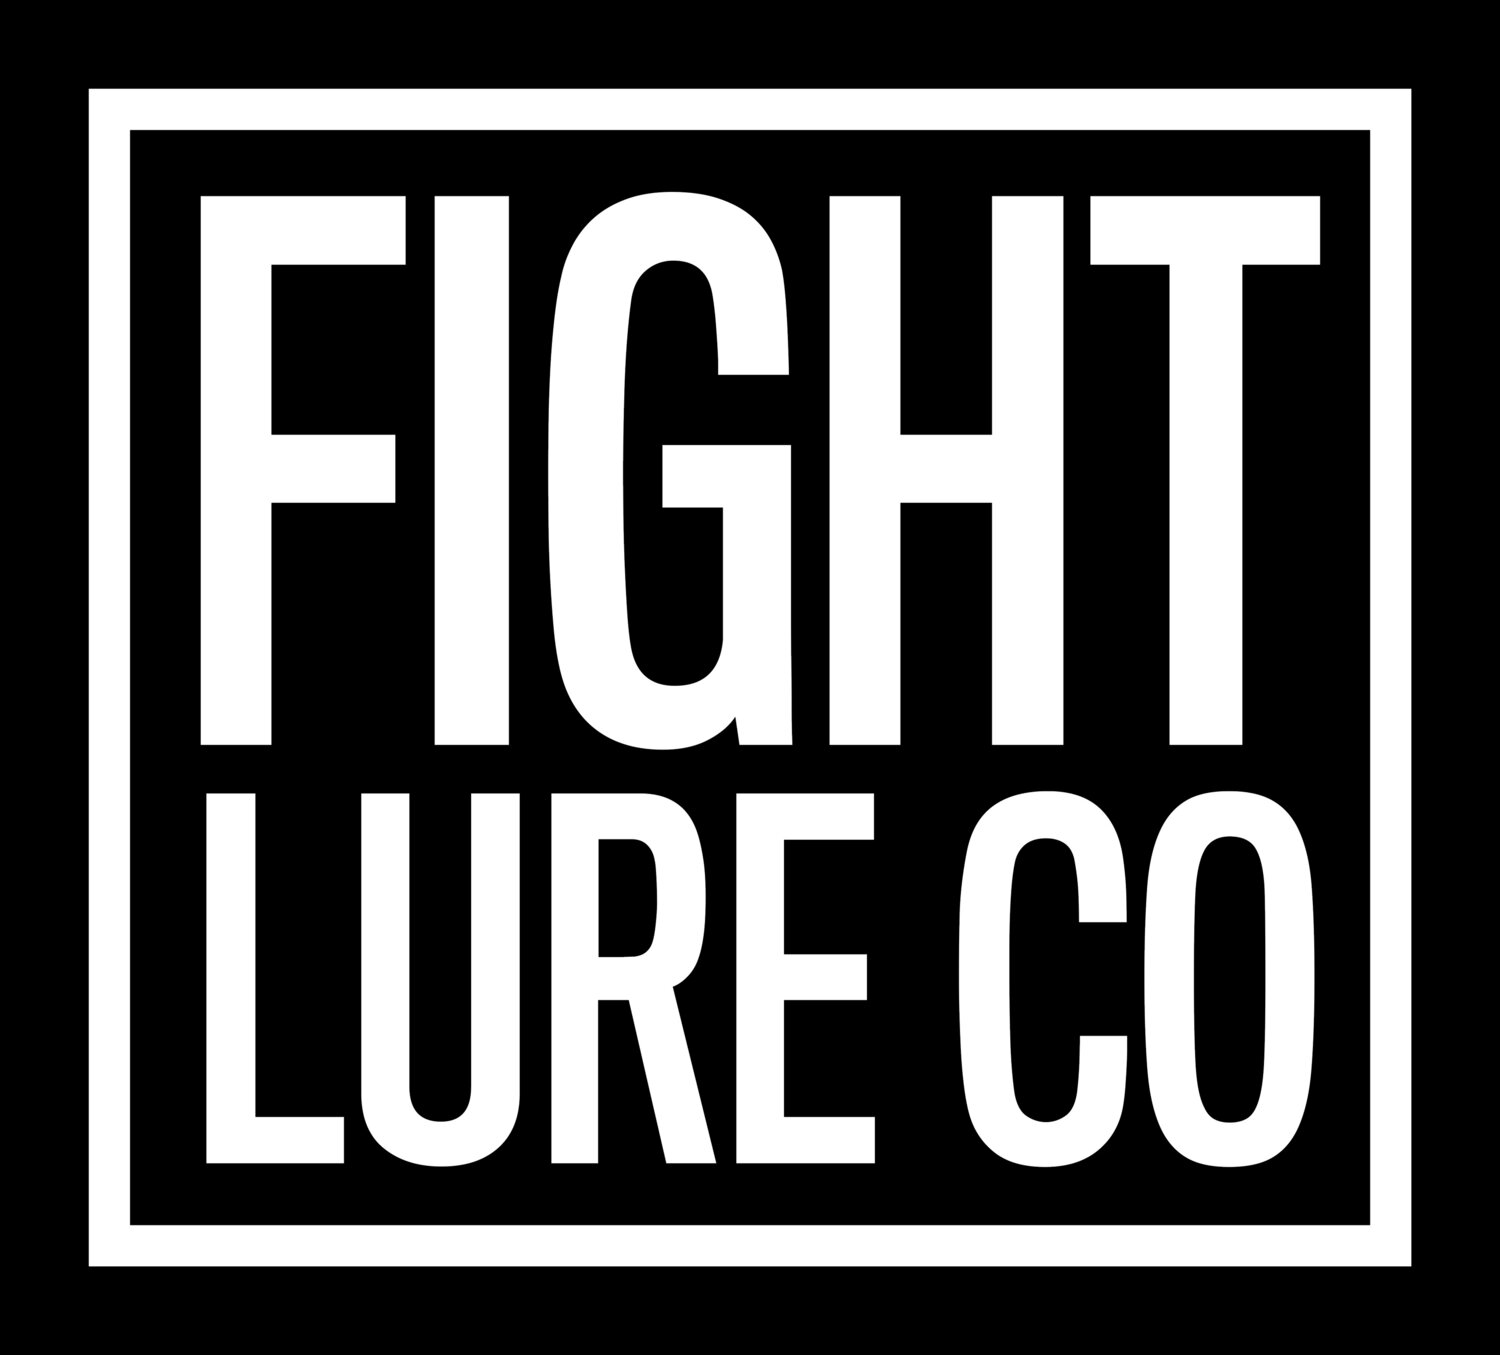   Fight Lure Co